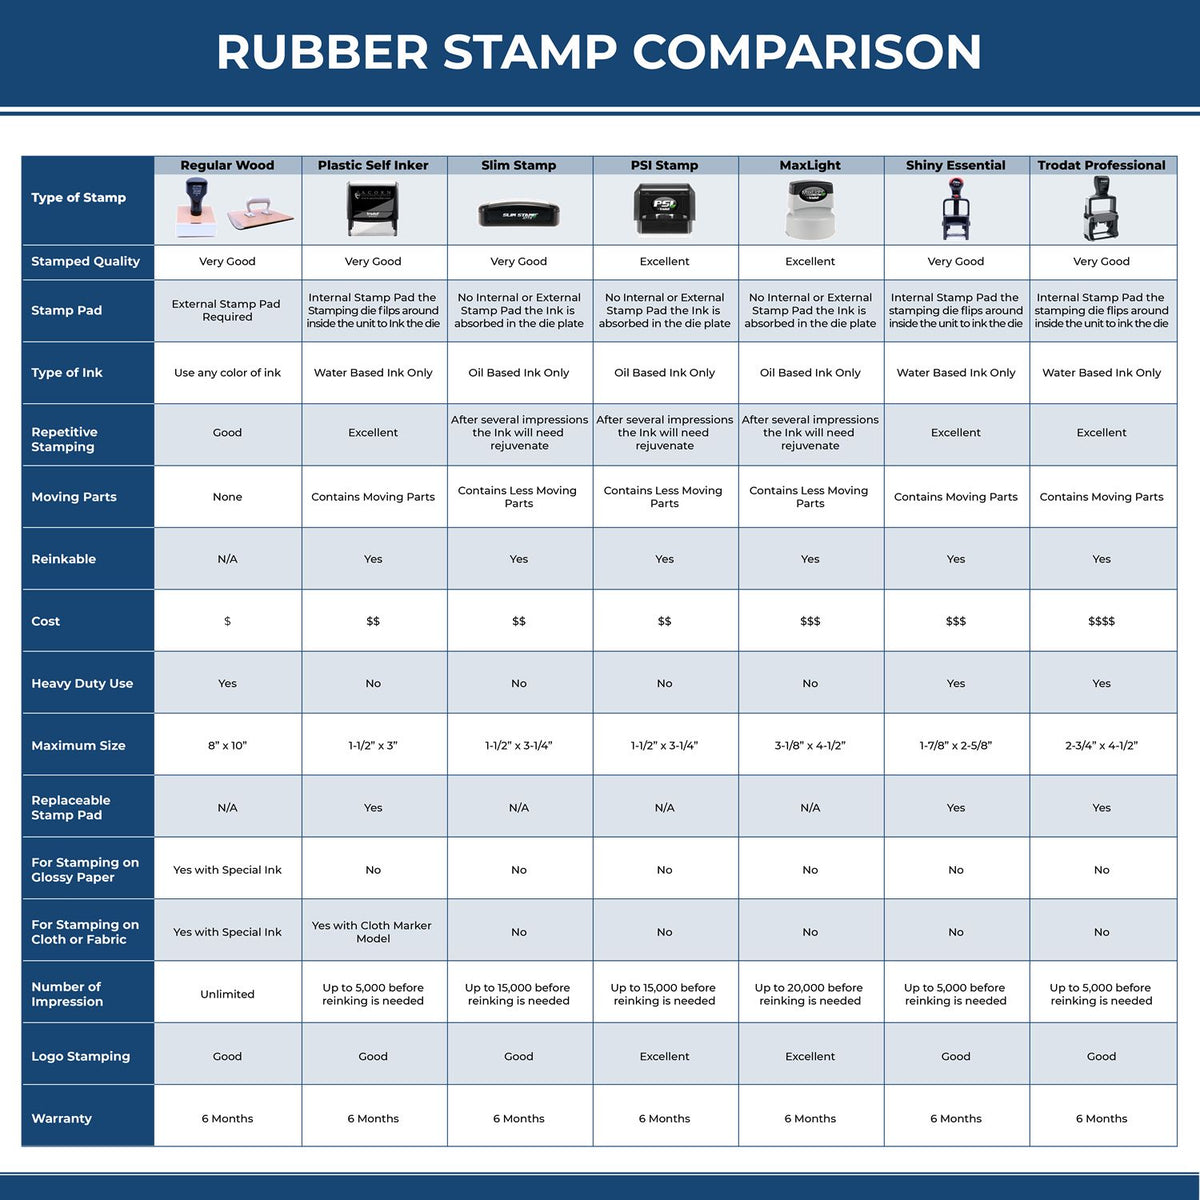 A comparison chart for the different types of mount models available for the Heavy-Duty Missouri Rectangular Notary Stamp.